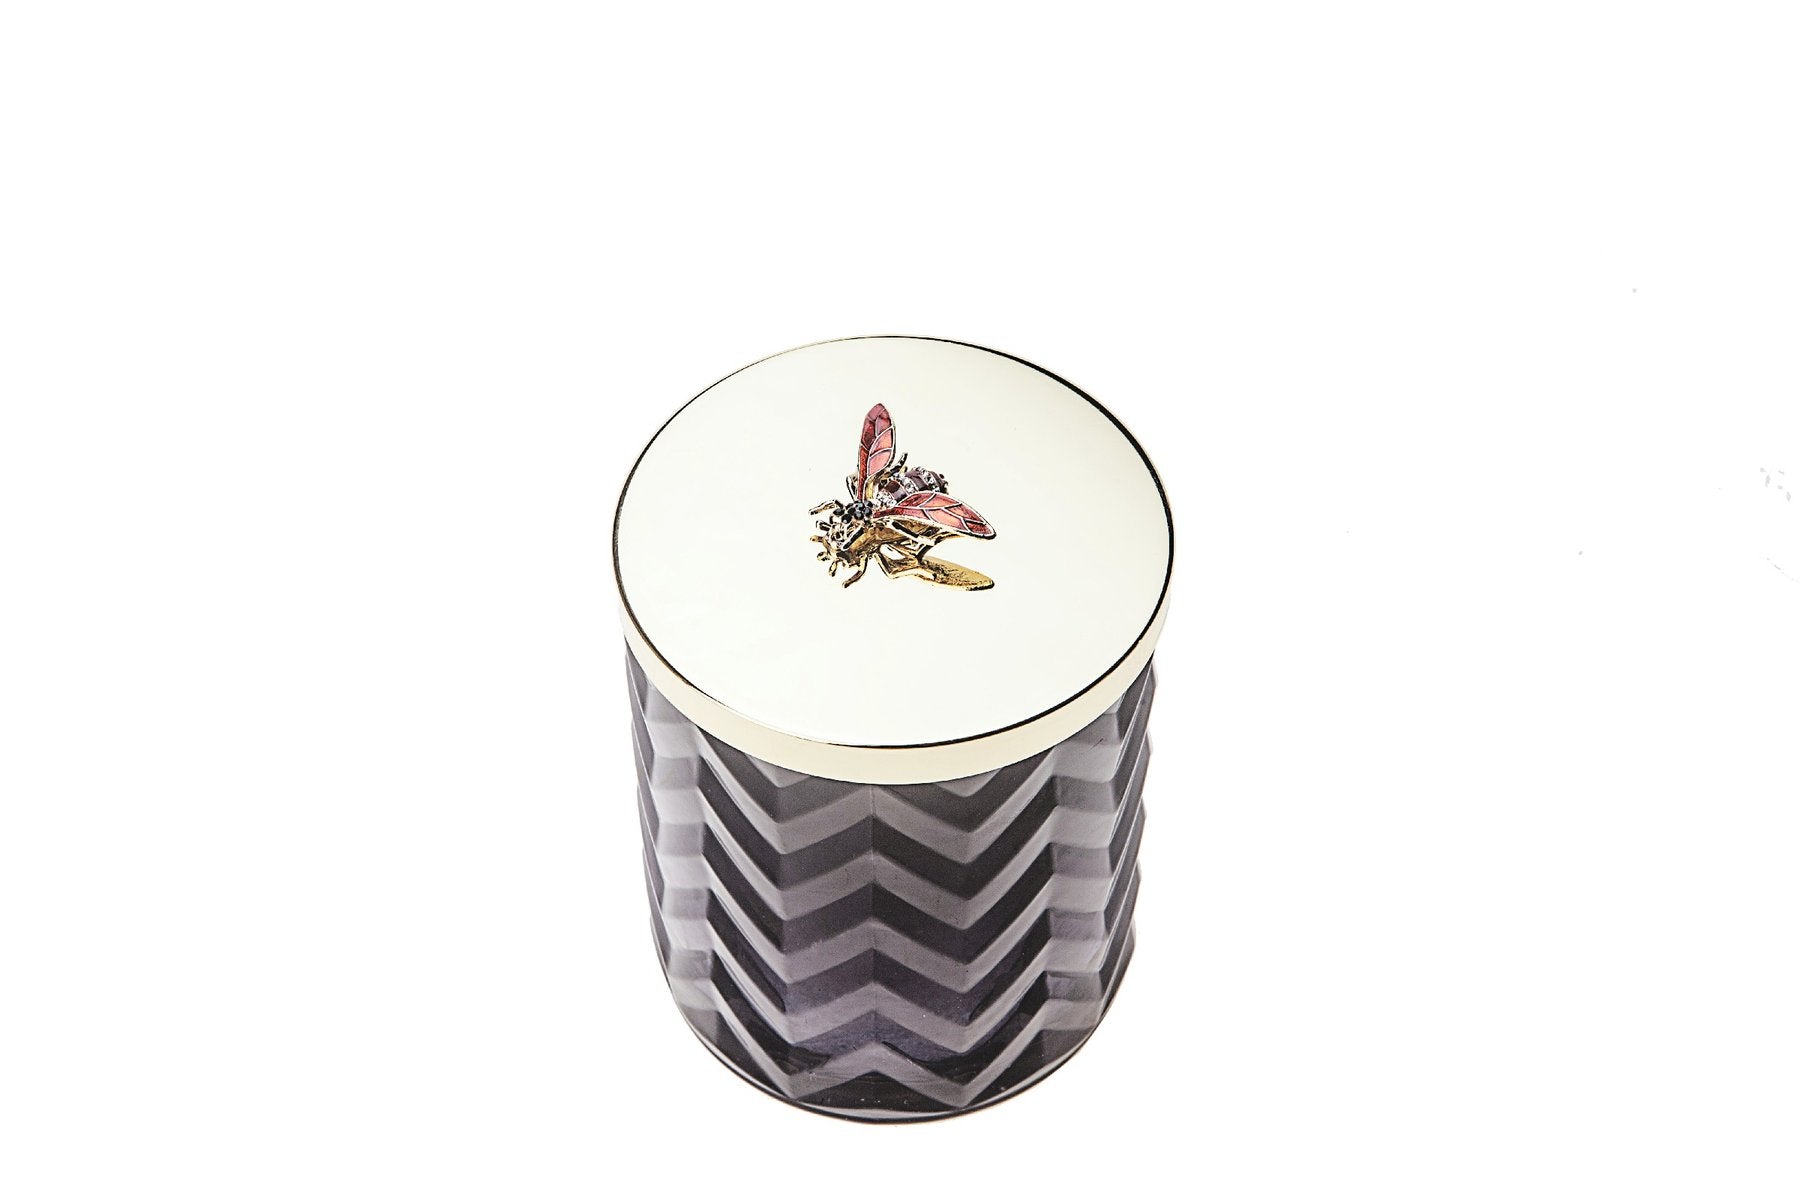 COTE NOIRE Herringbone Candle with Scarf - Red Bee Lid